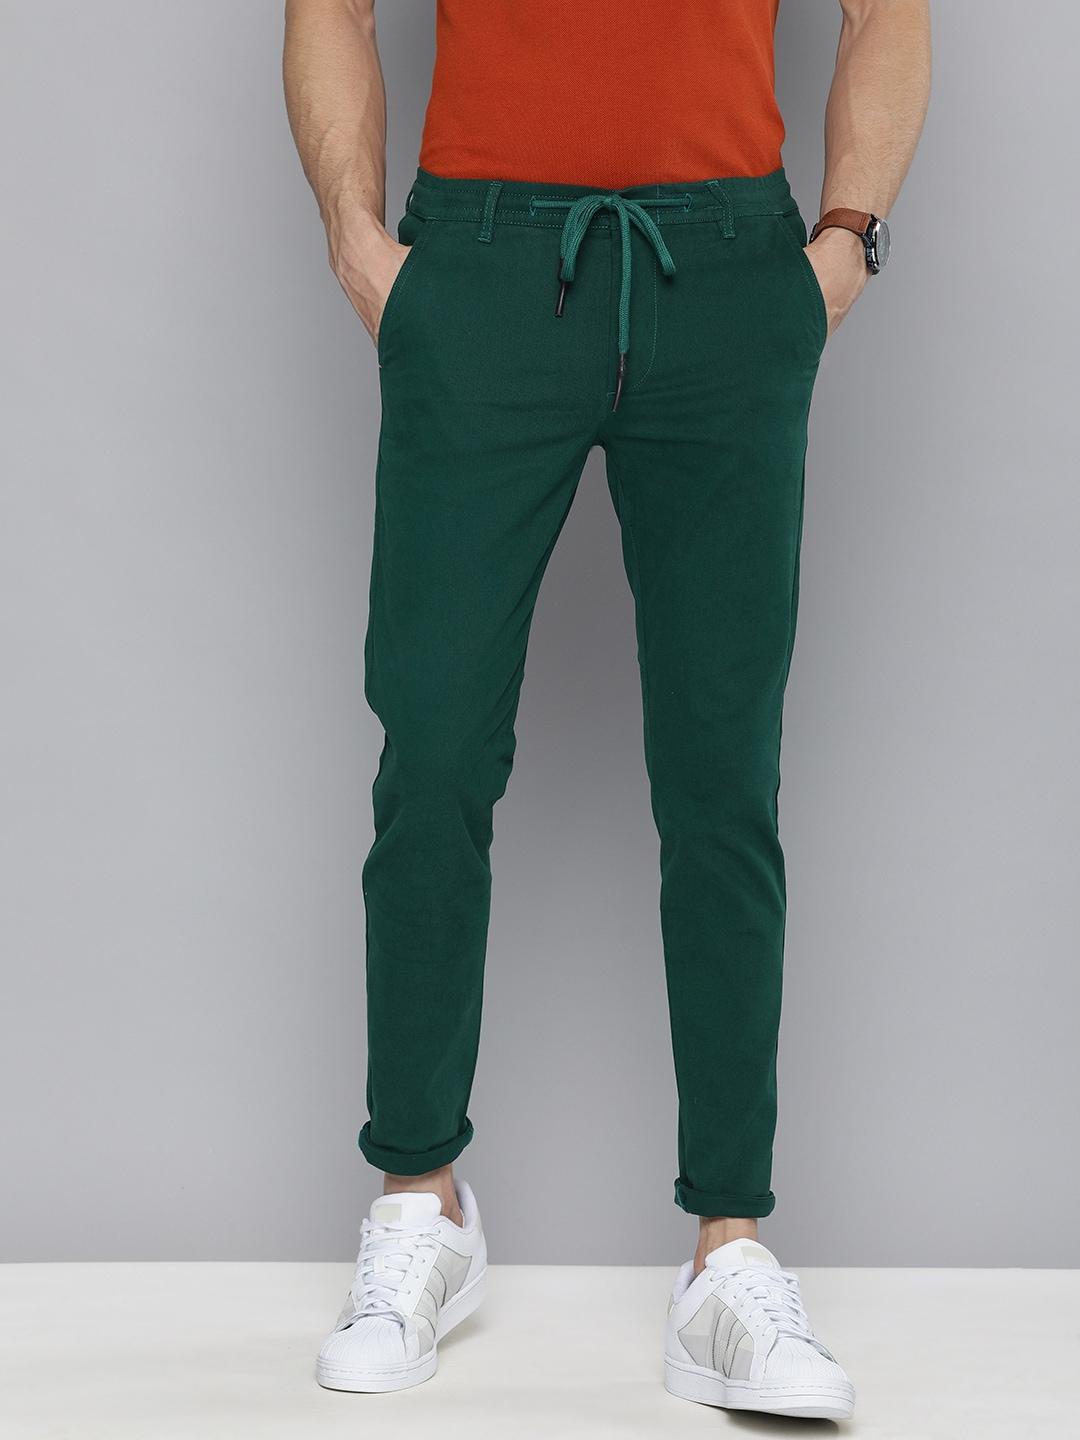 the-indian-garage-co-men-teal-slim-fit-chinos-trousers